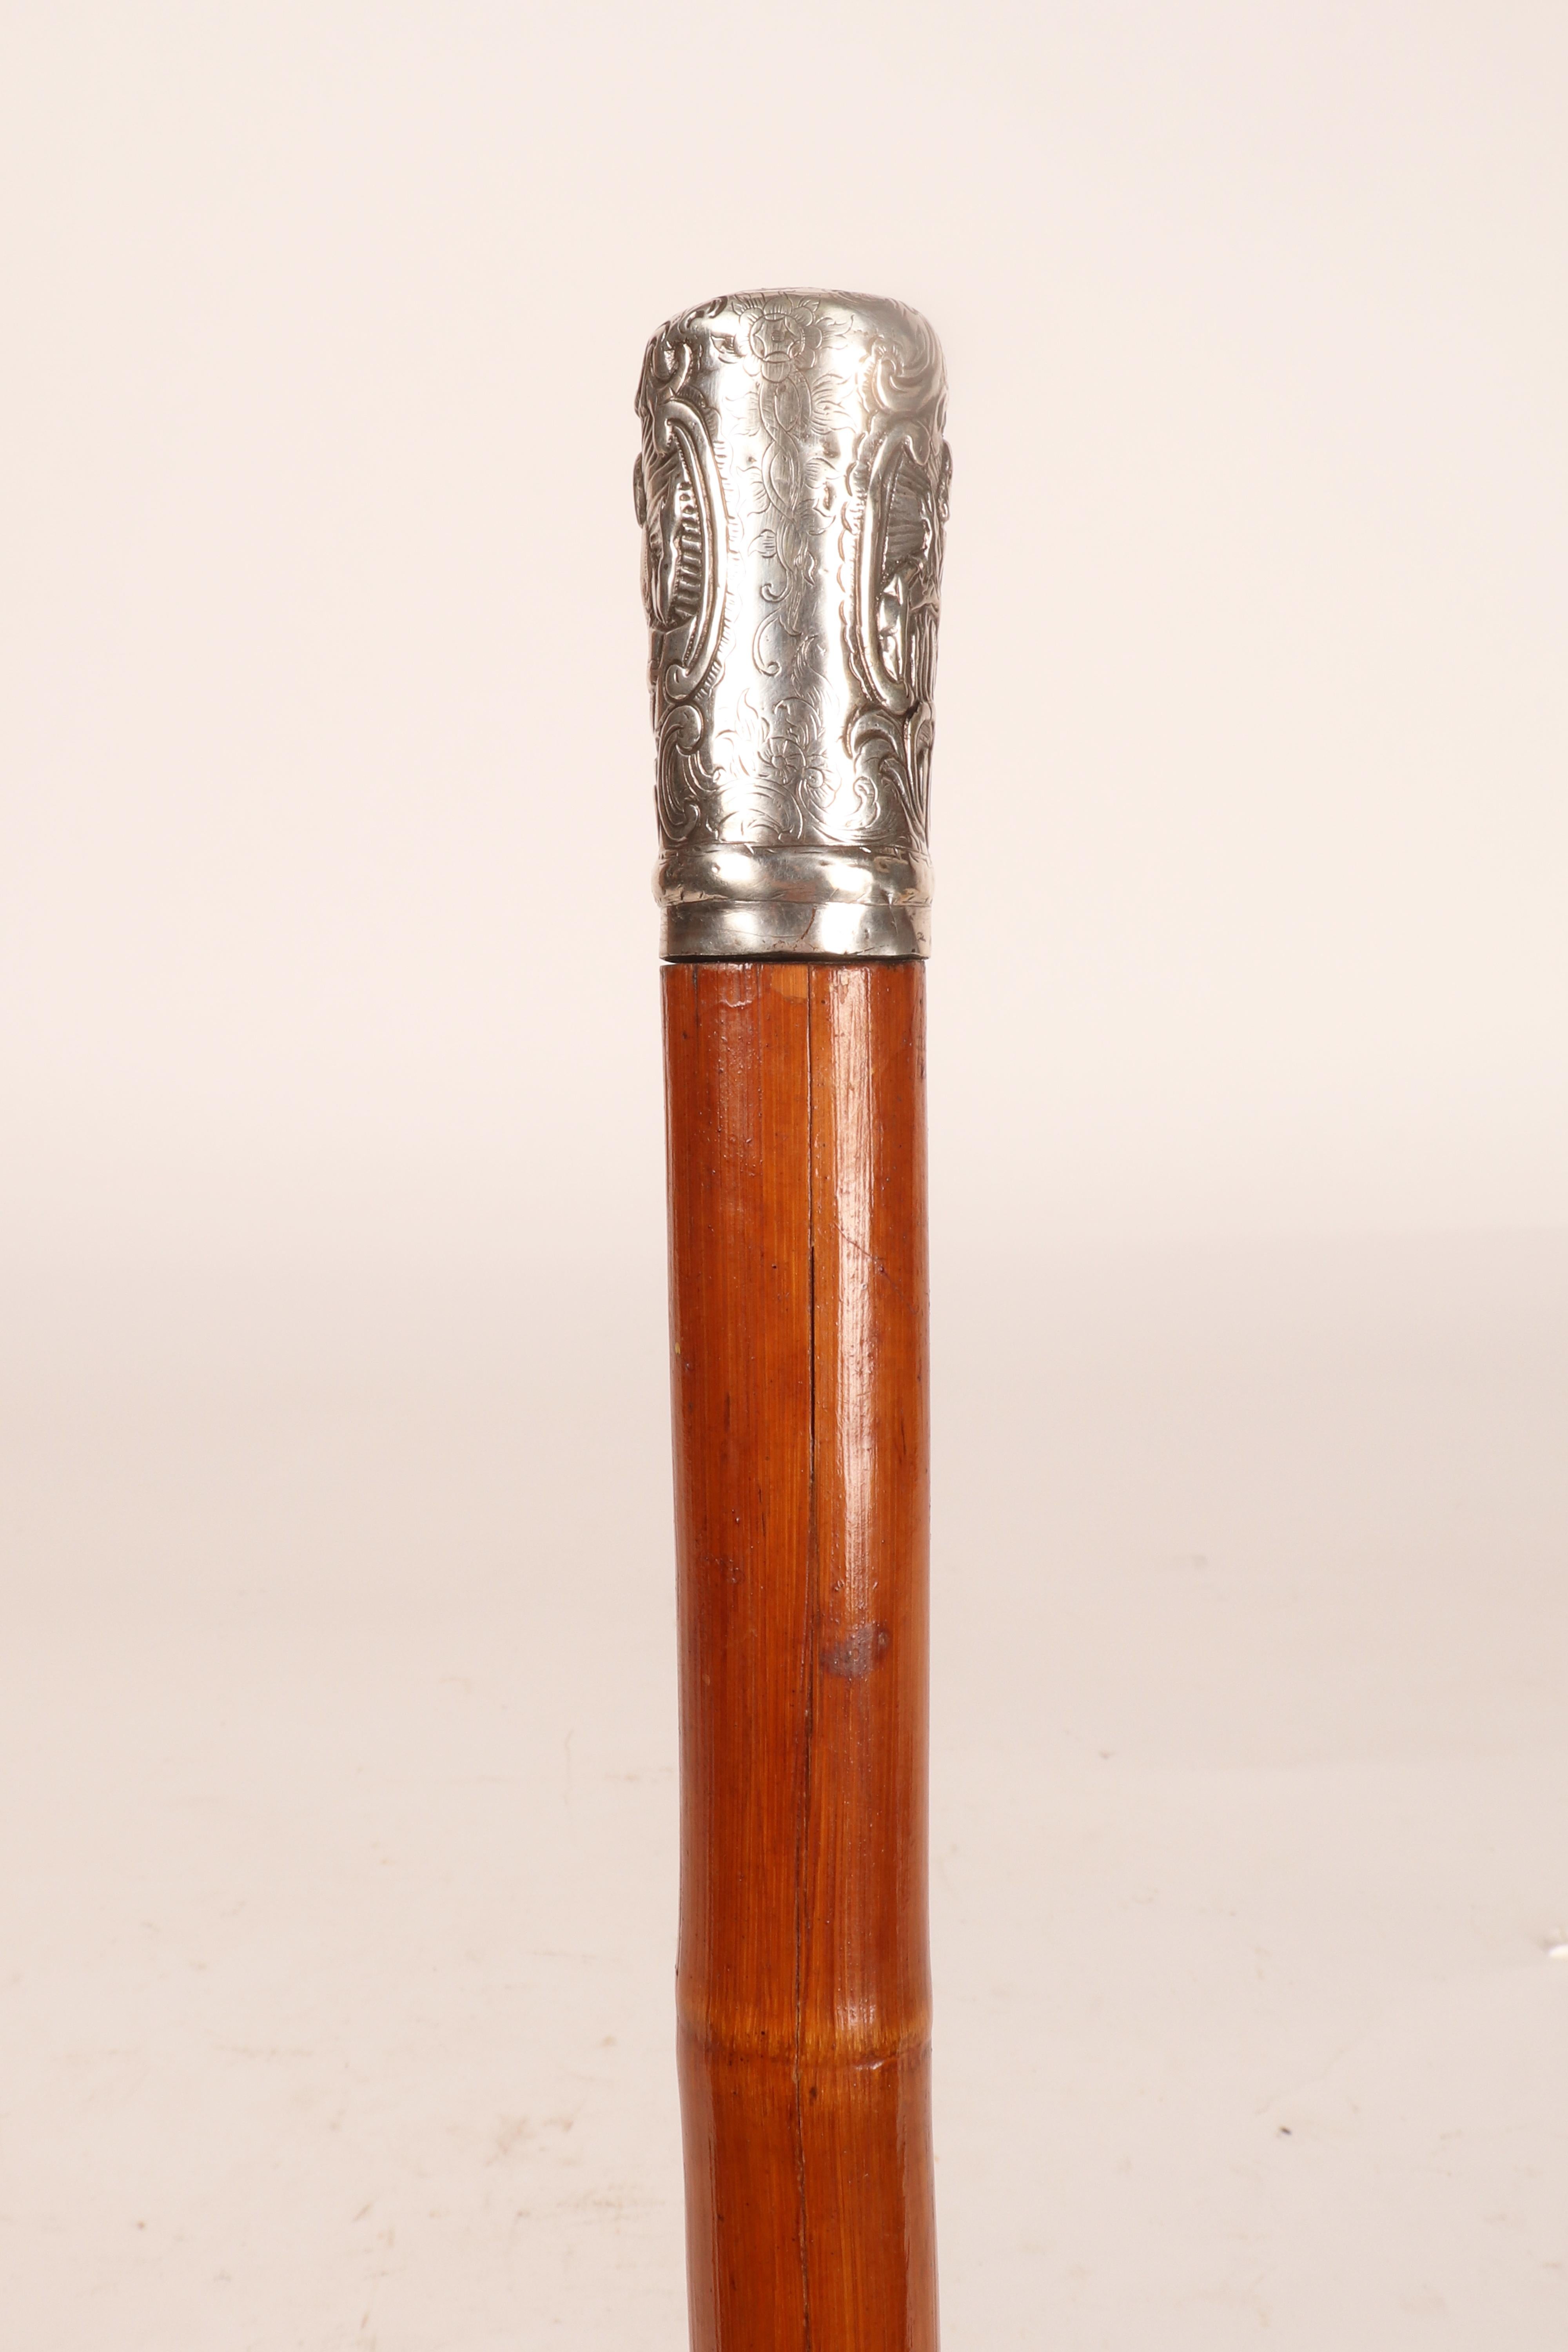 19th Century Customs officer's walking stick for goods inspection, Germany, 1870. For Sale